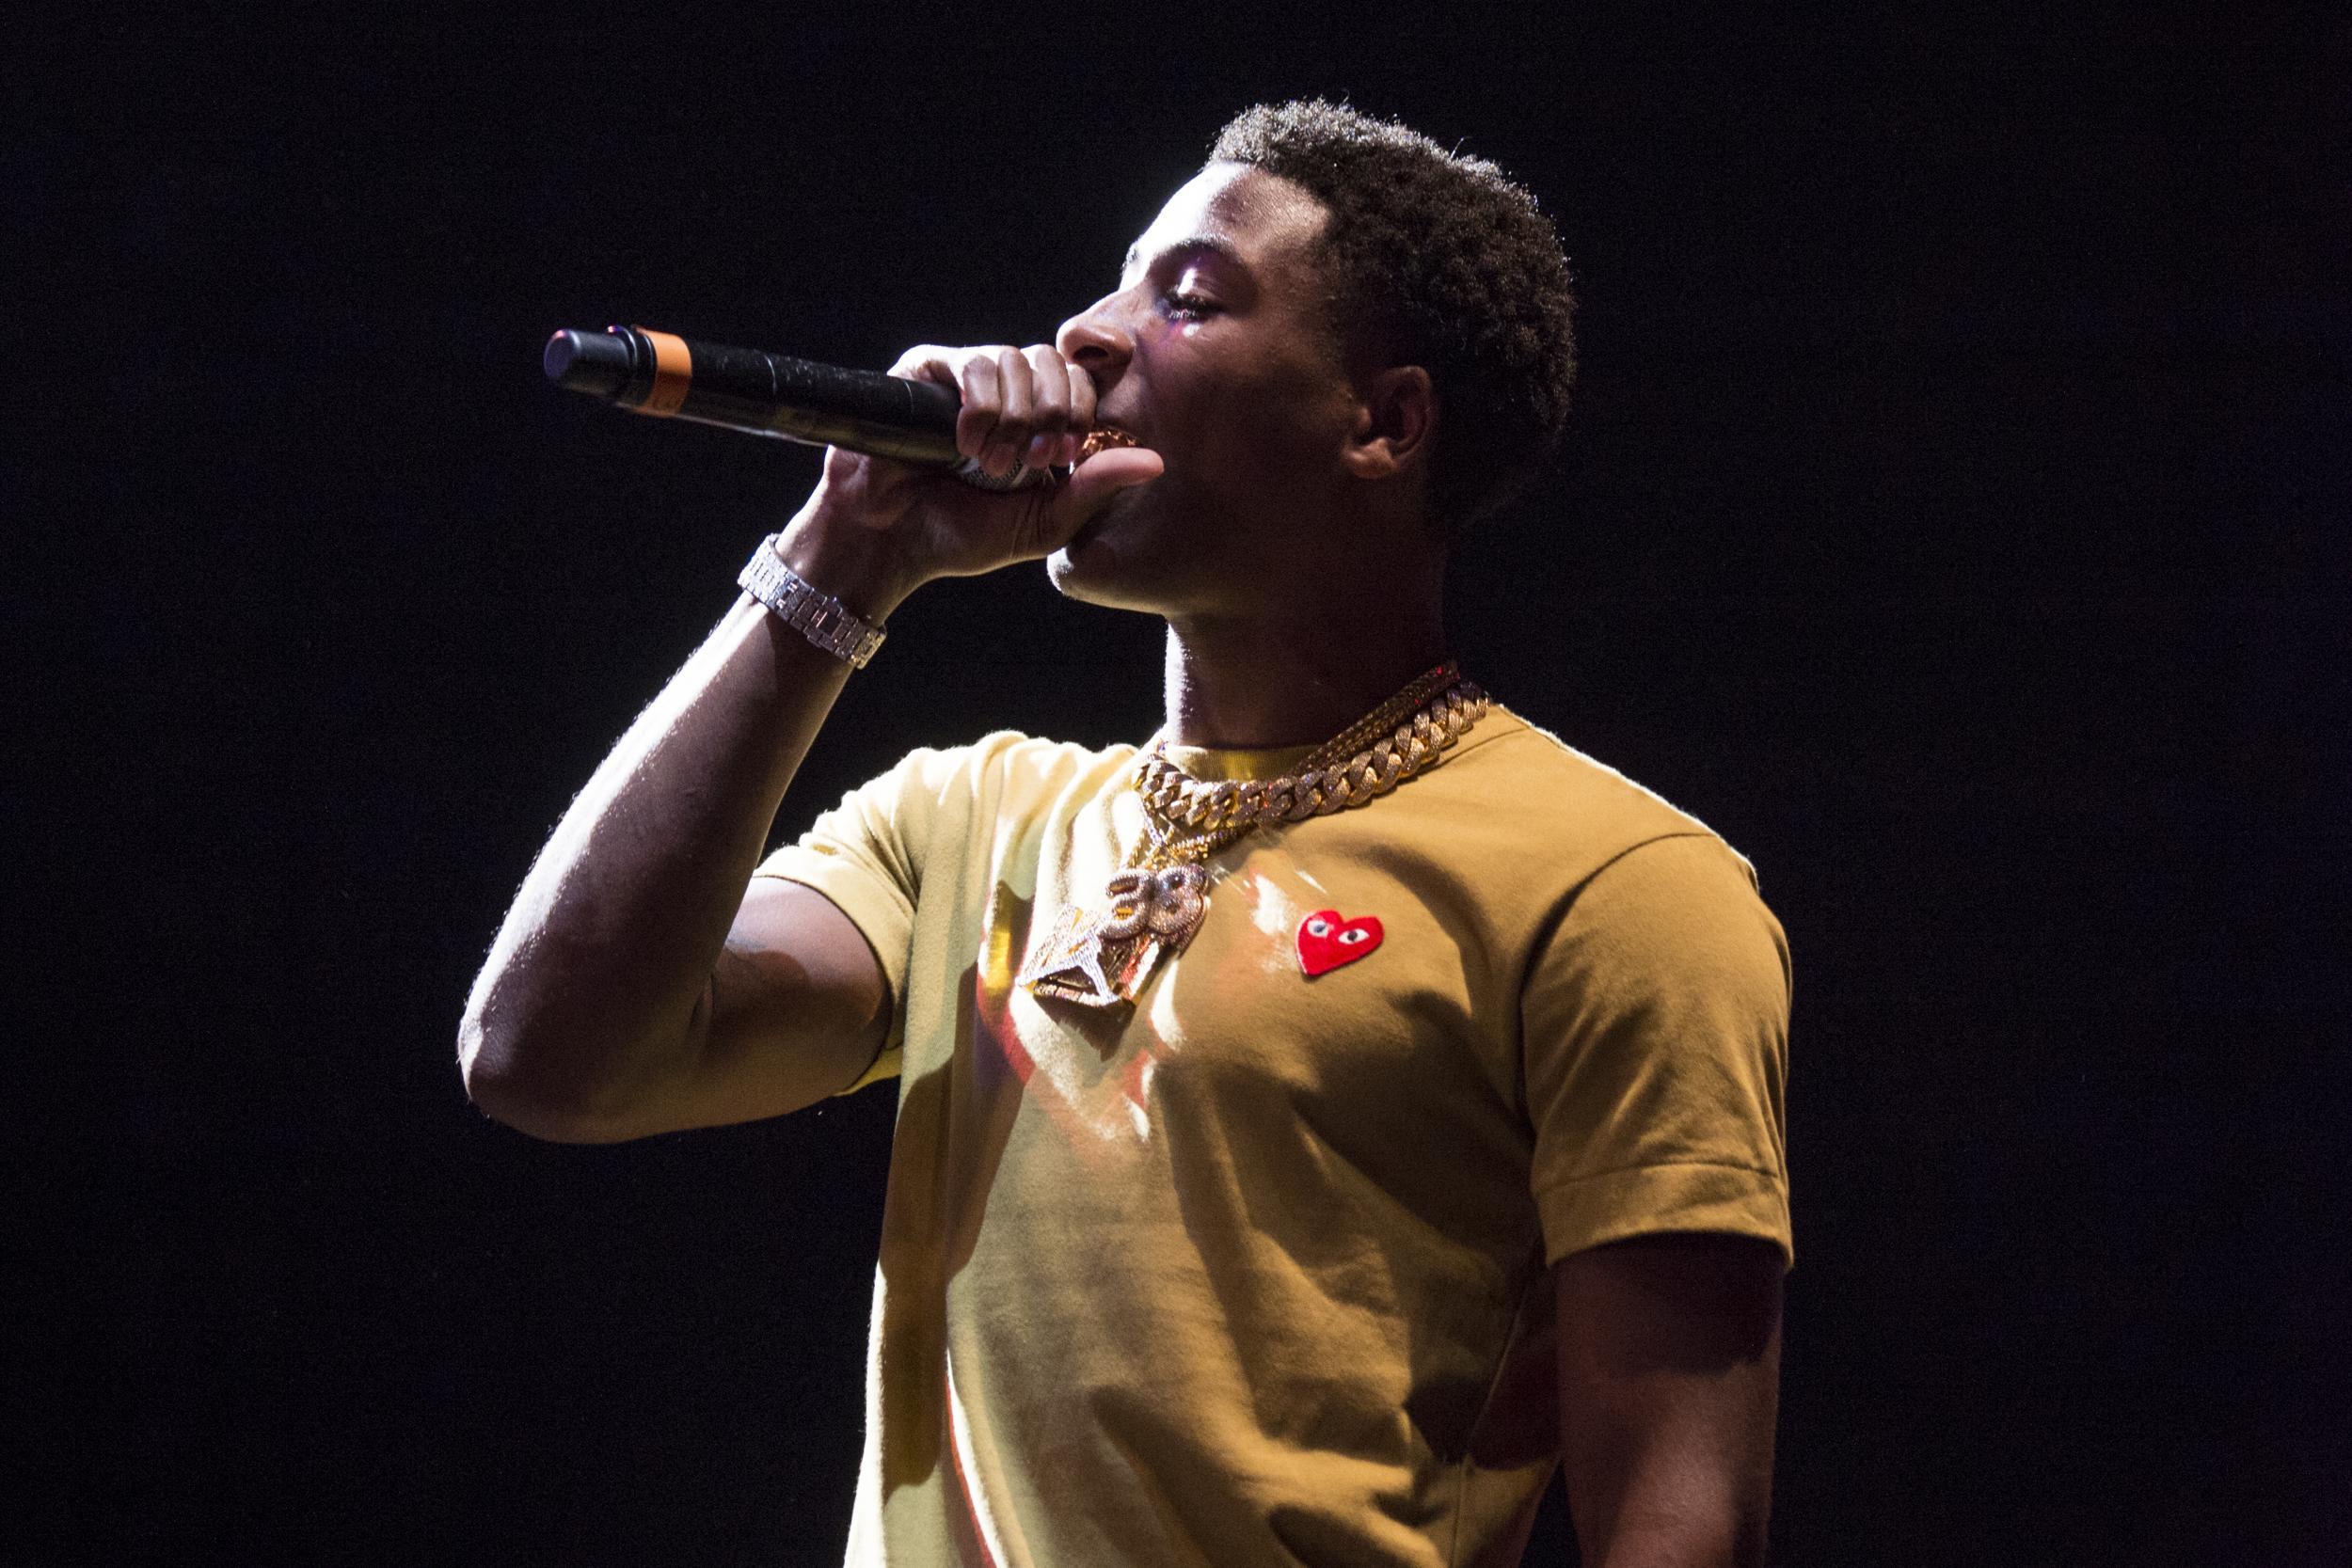 YoungBoy was arrested ahead of a sold-out show in Florida